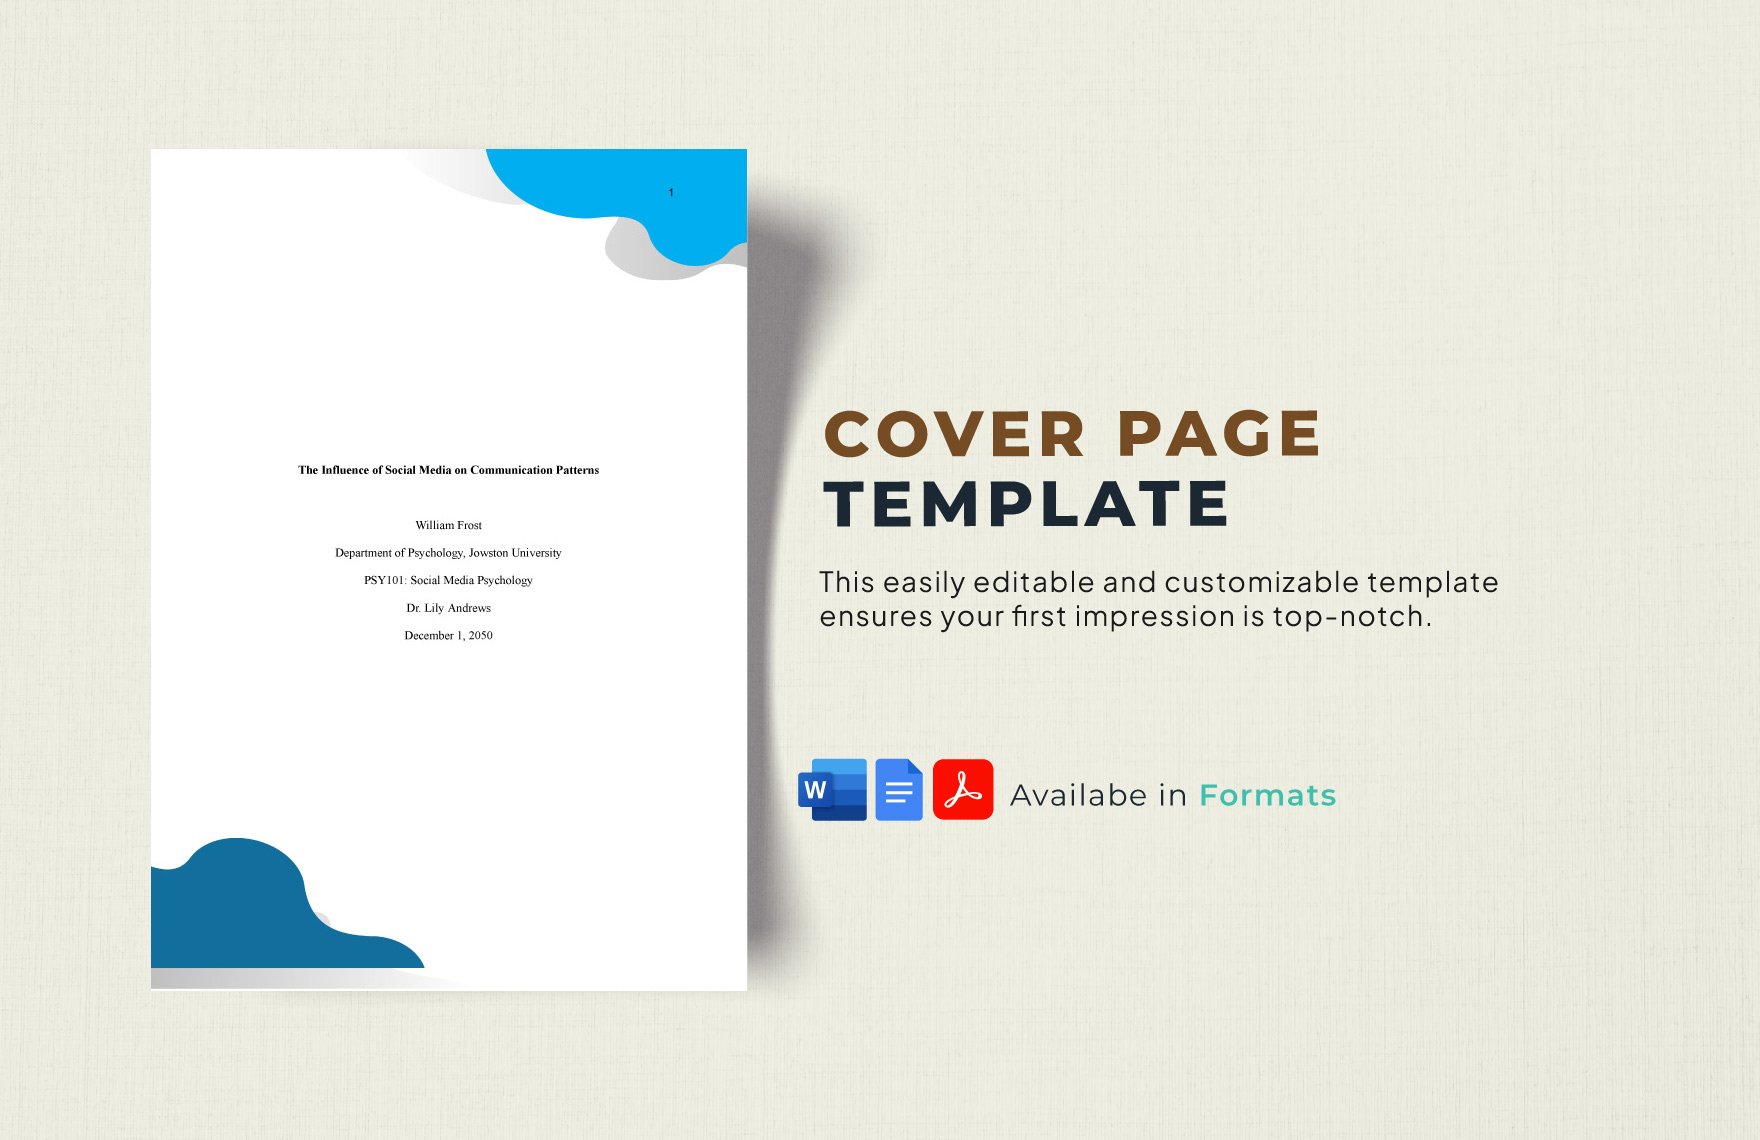 APA Cover Page Template